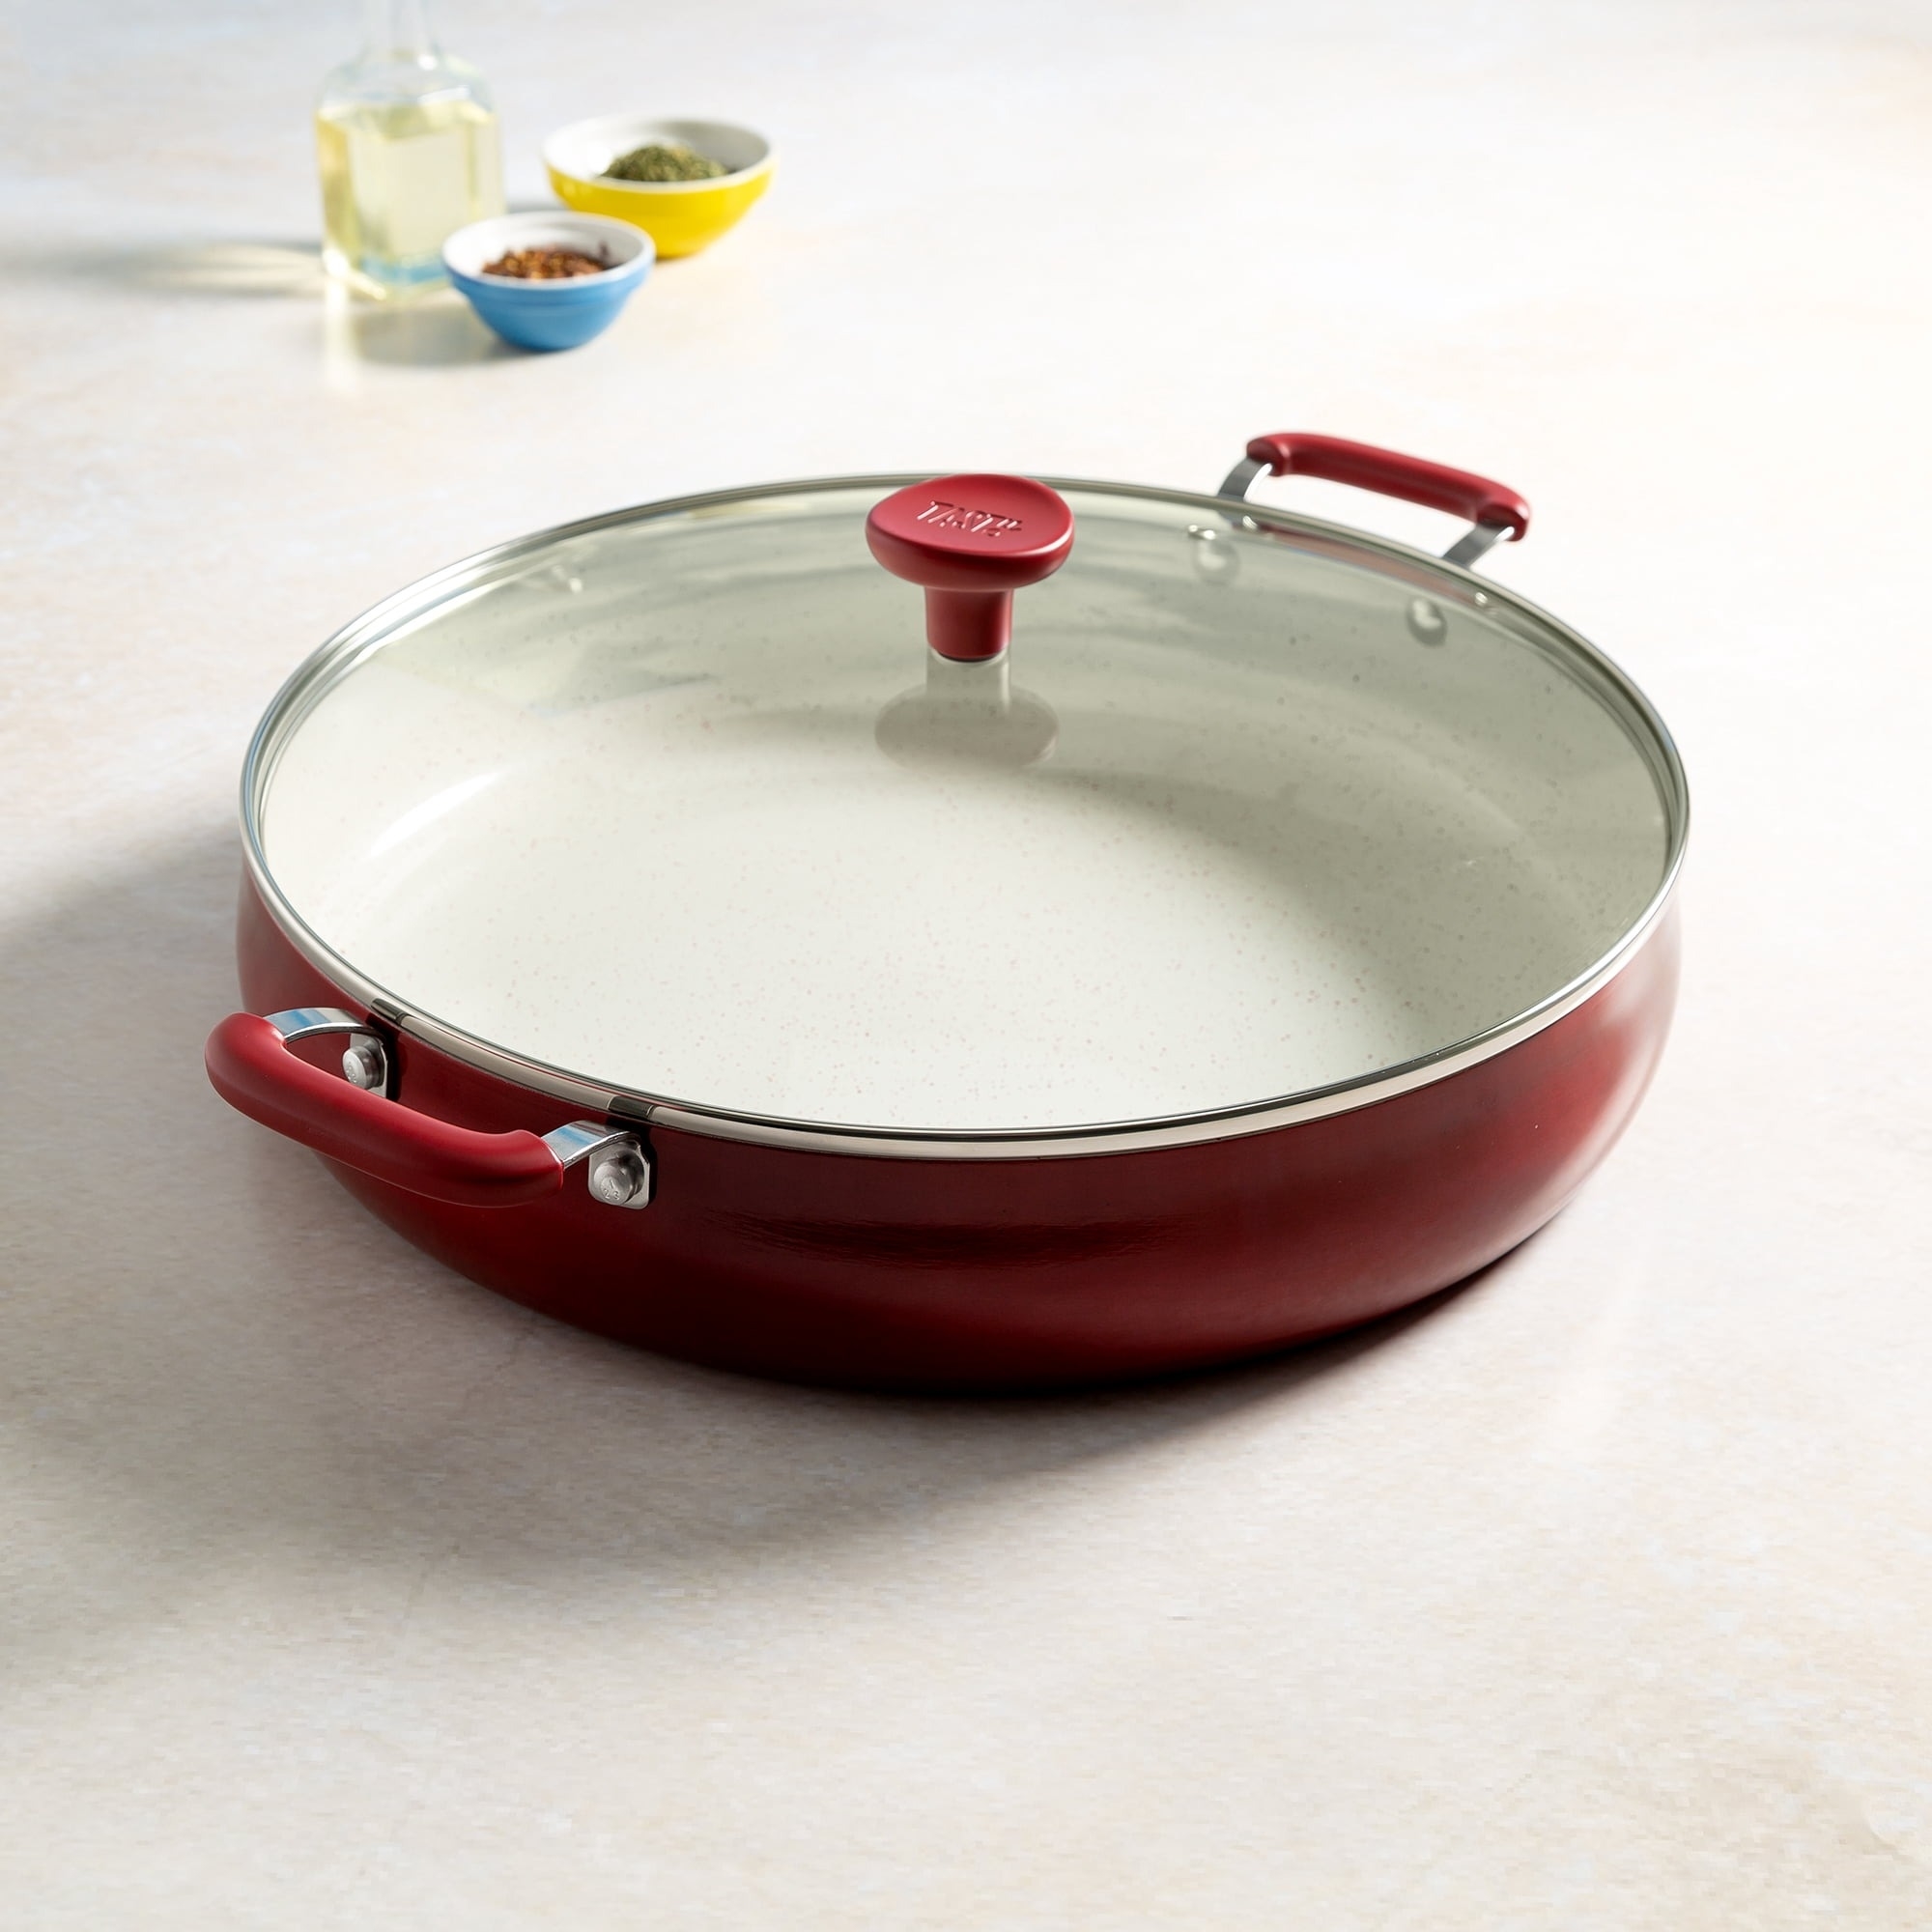 A red sauté pan with a lid and white interior.